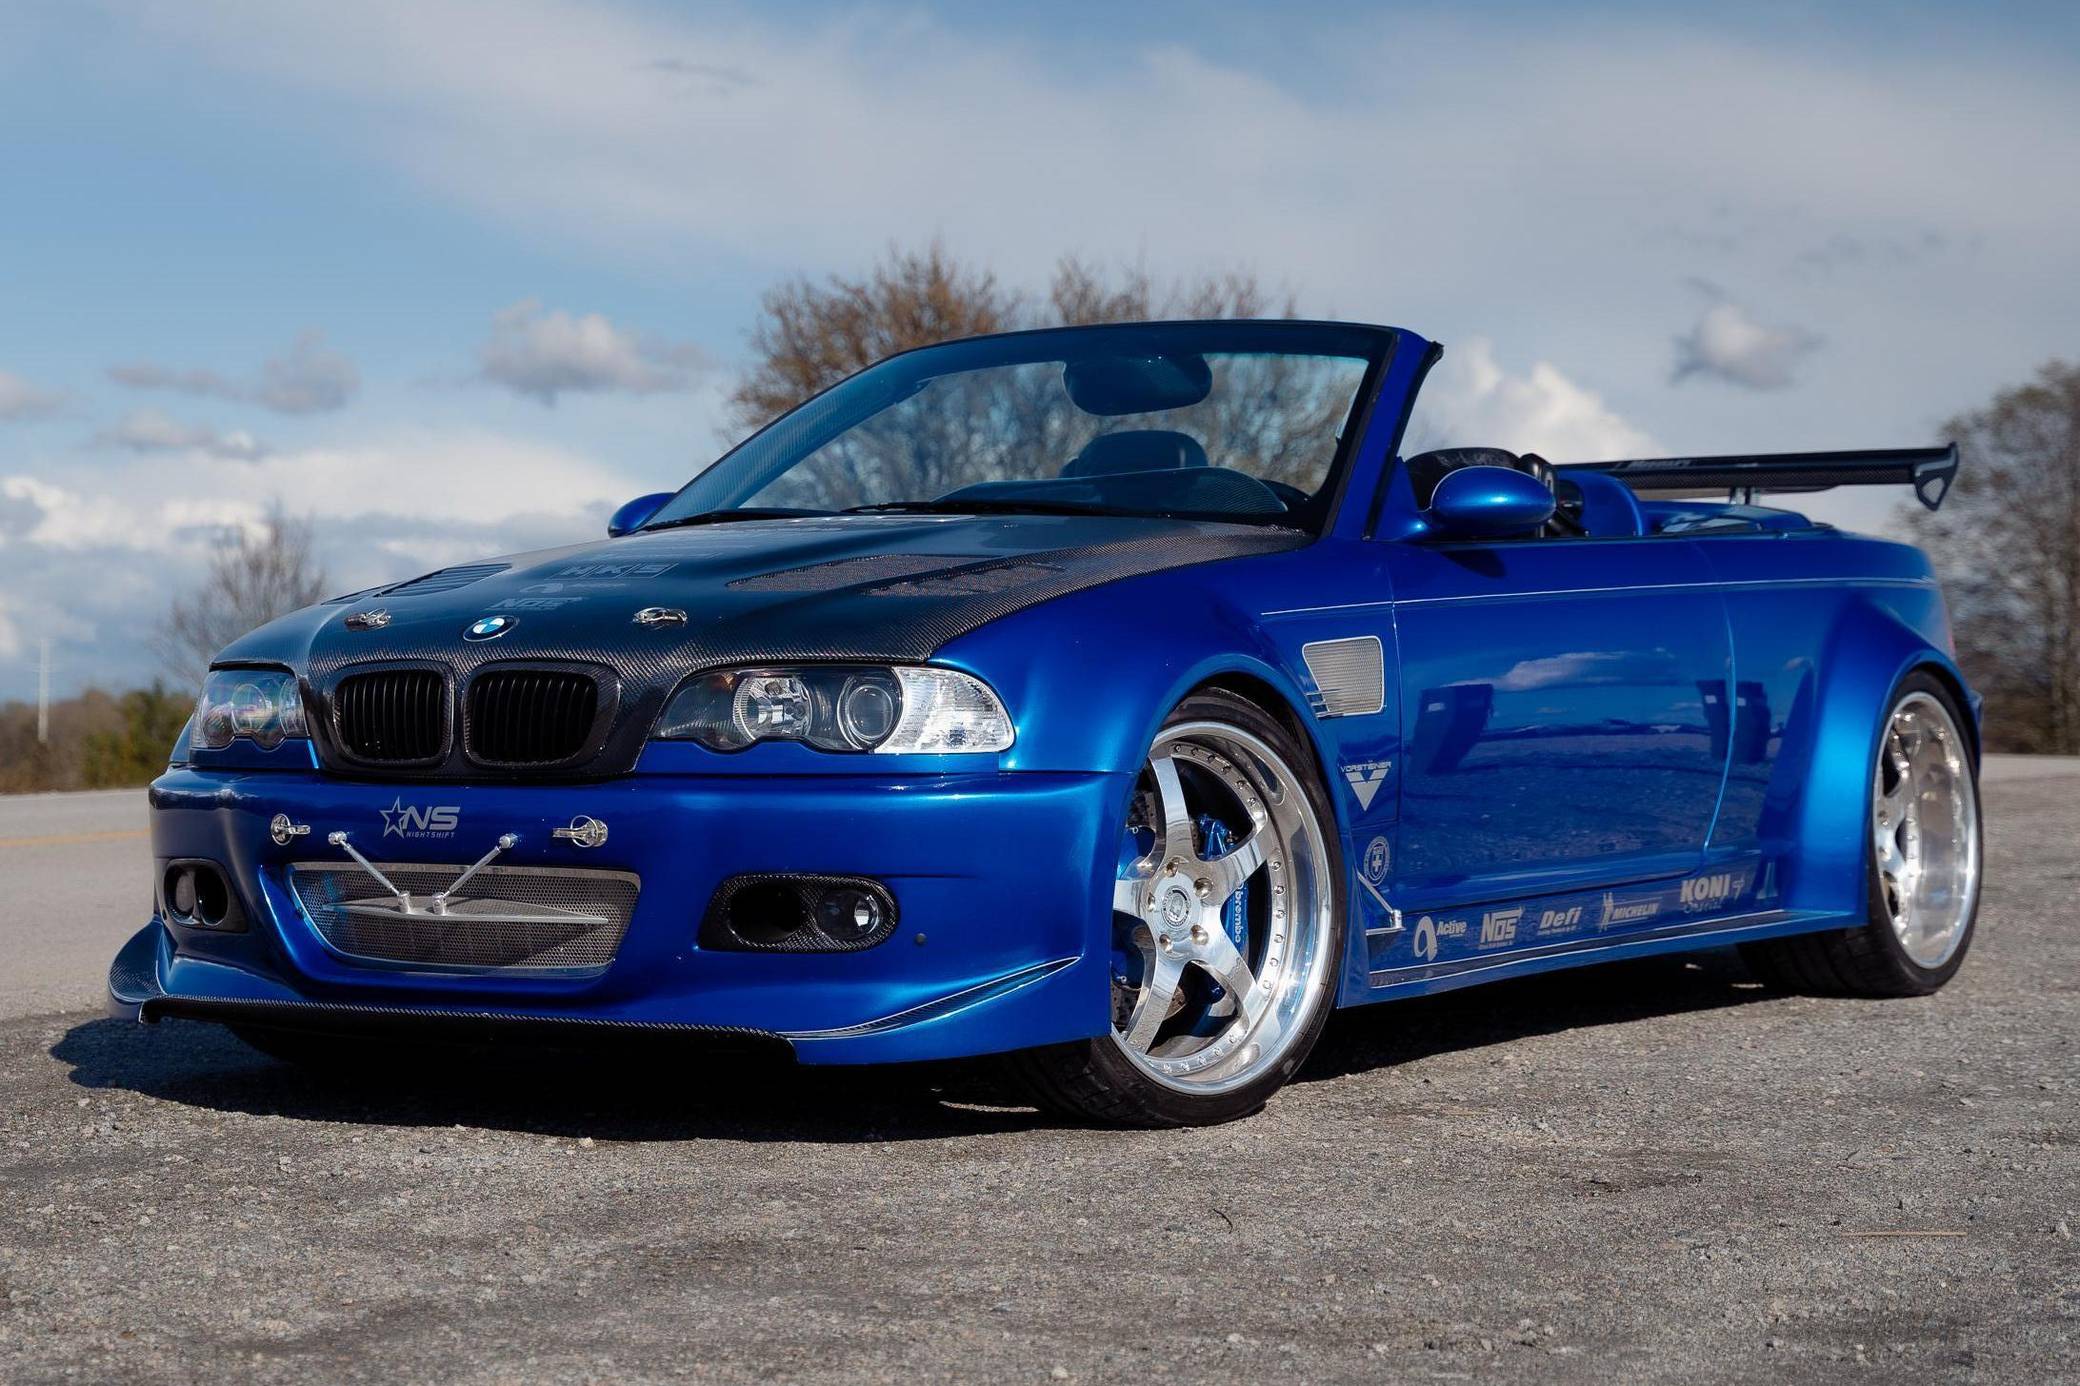 Tuning Shop BMW E46 - Body kits, Spoilers, Lighting and more. - Convert Cars